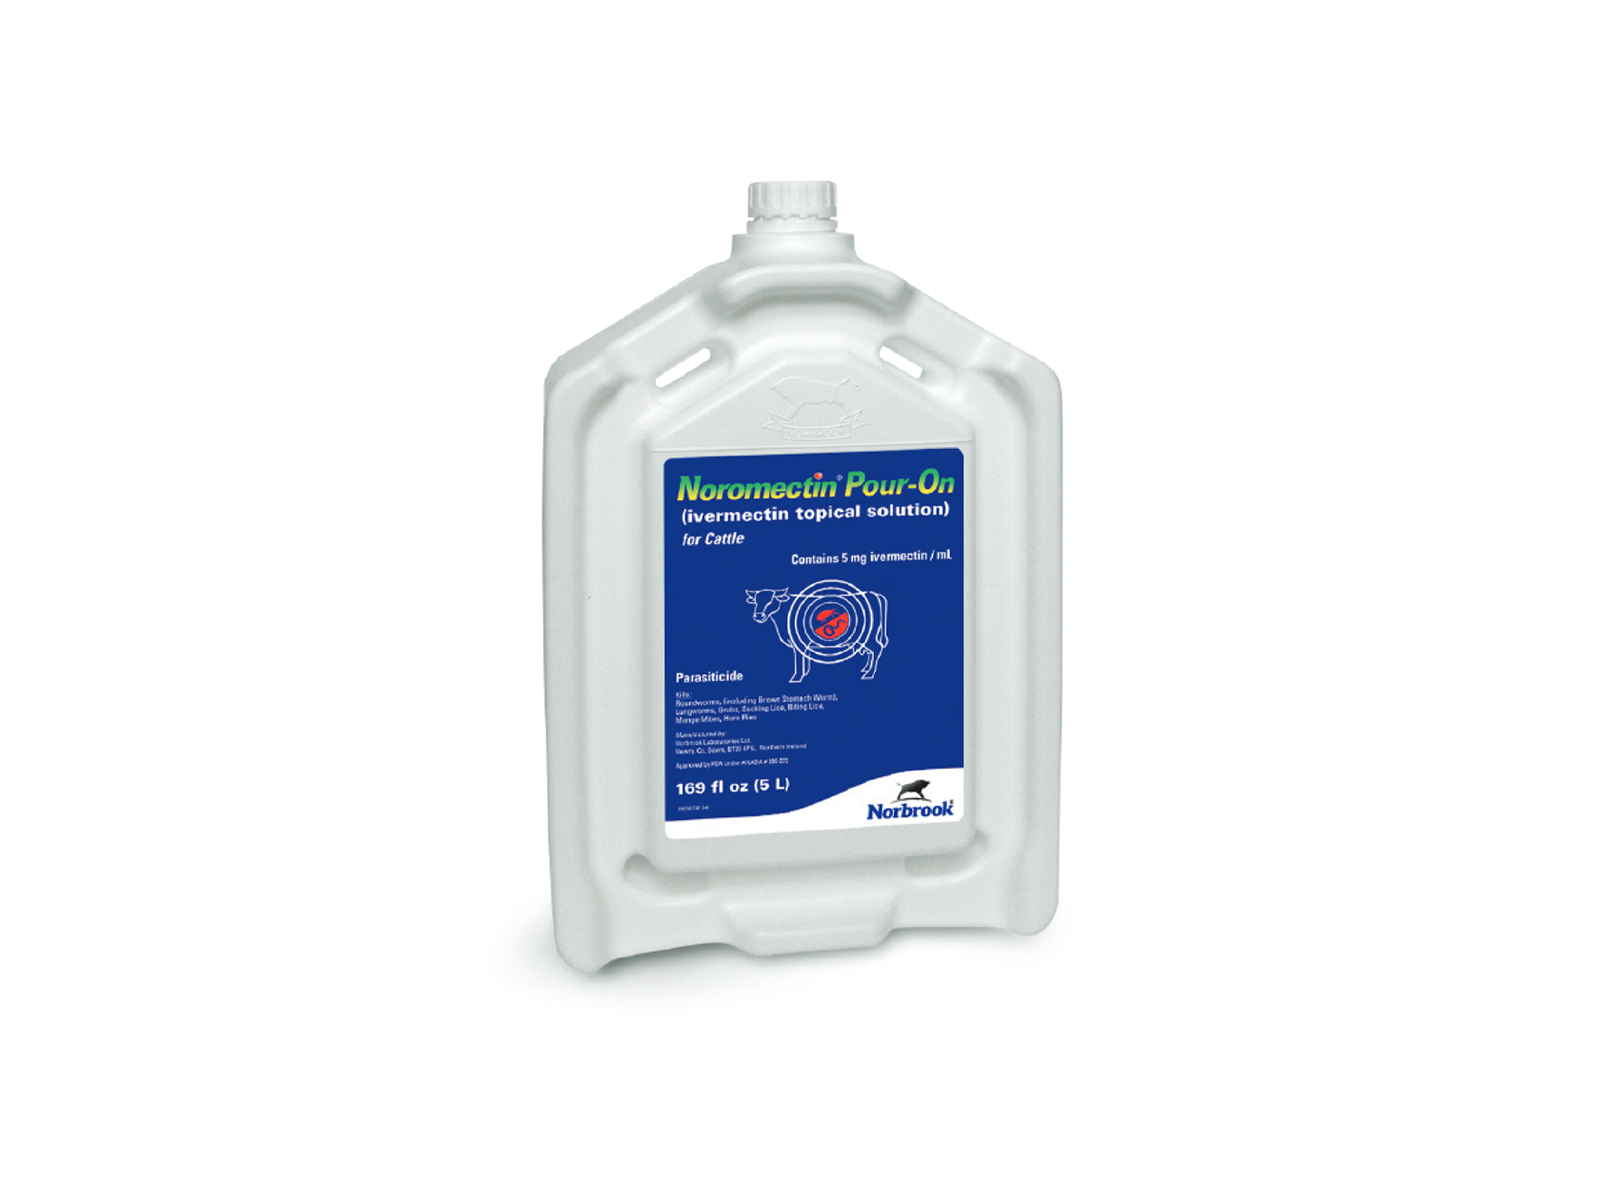 Noromectin® Pour-On (ivermectin topical solution) for Cattle